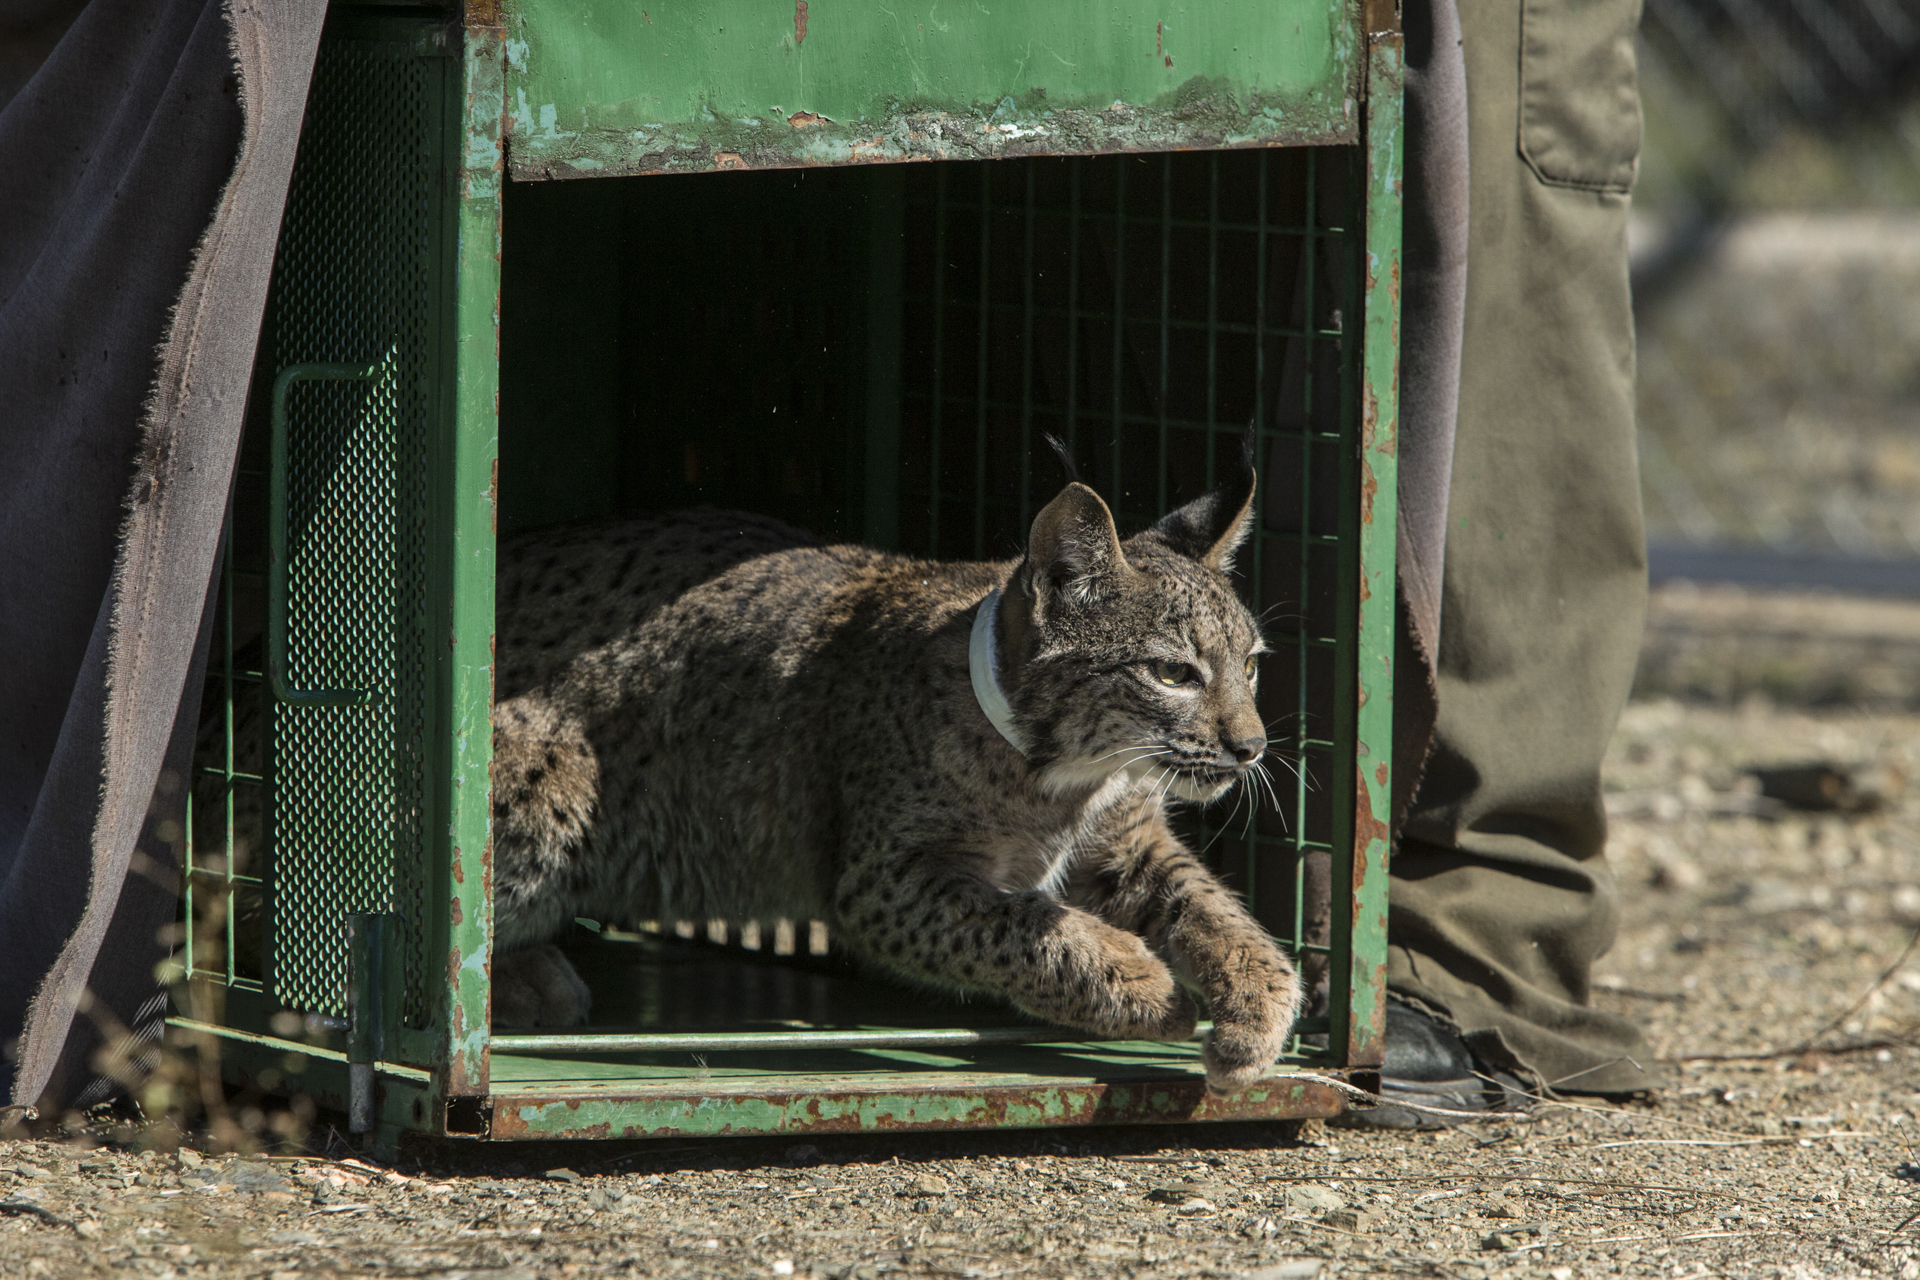  A young cub is released back into its enclosure after a health check and collar fitting.&nbsp; 